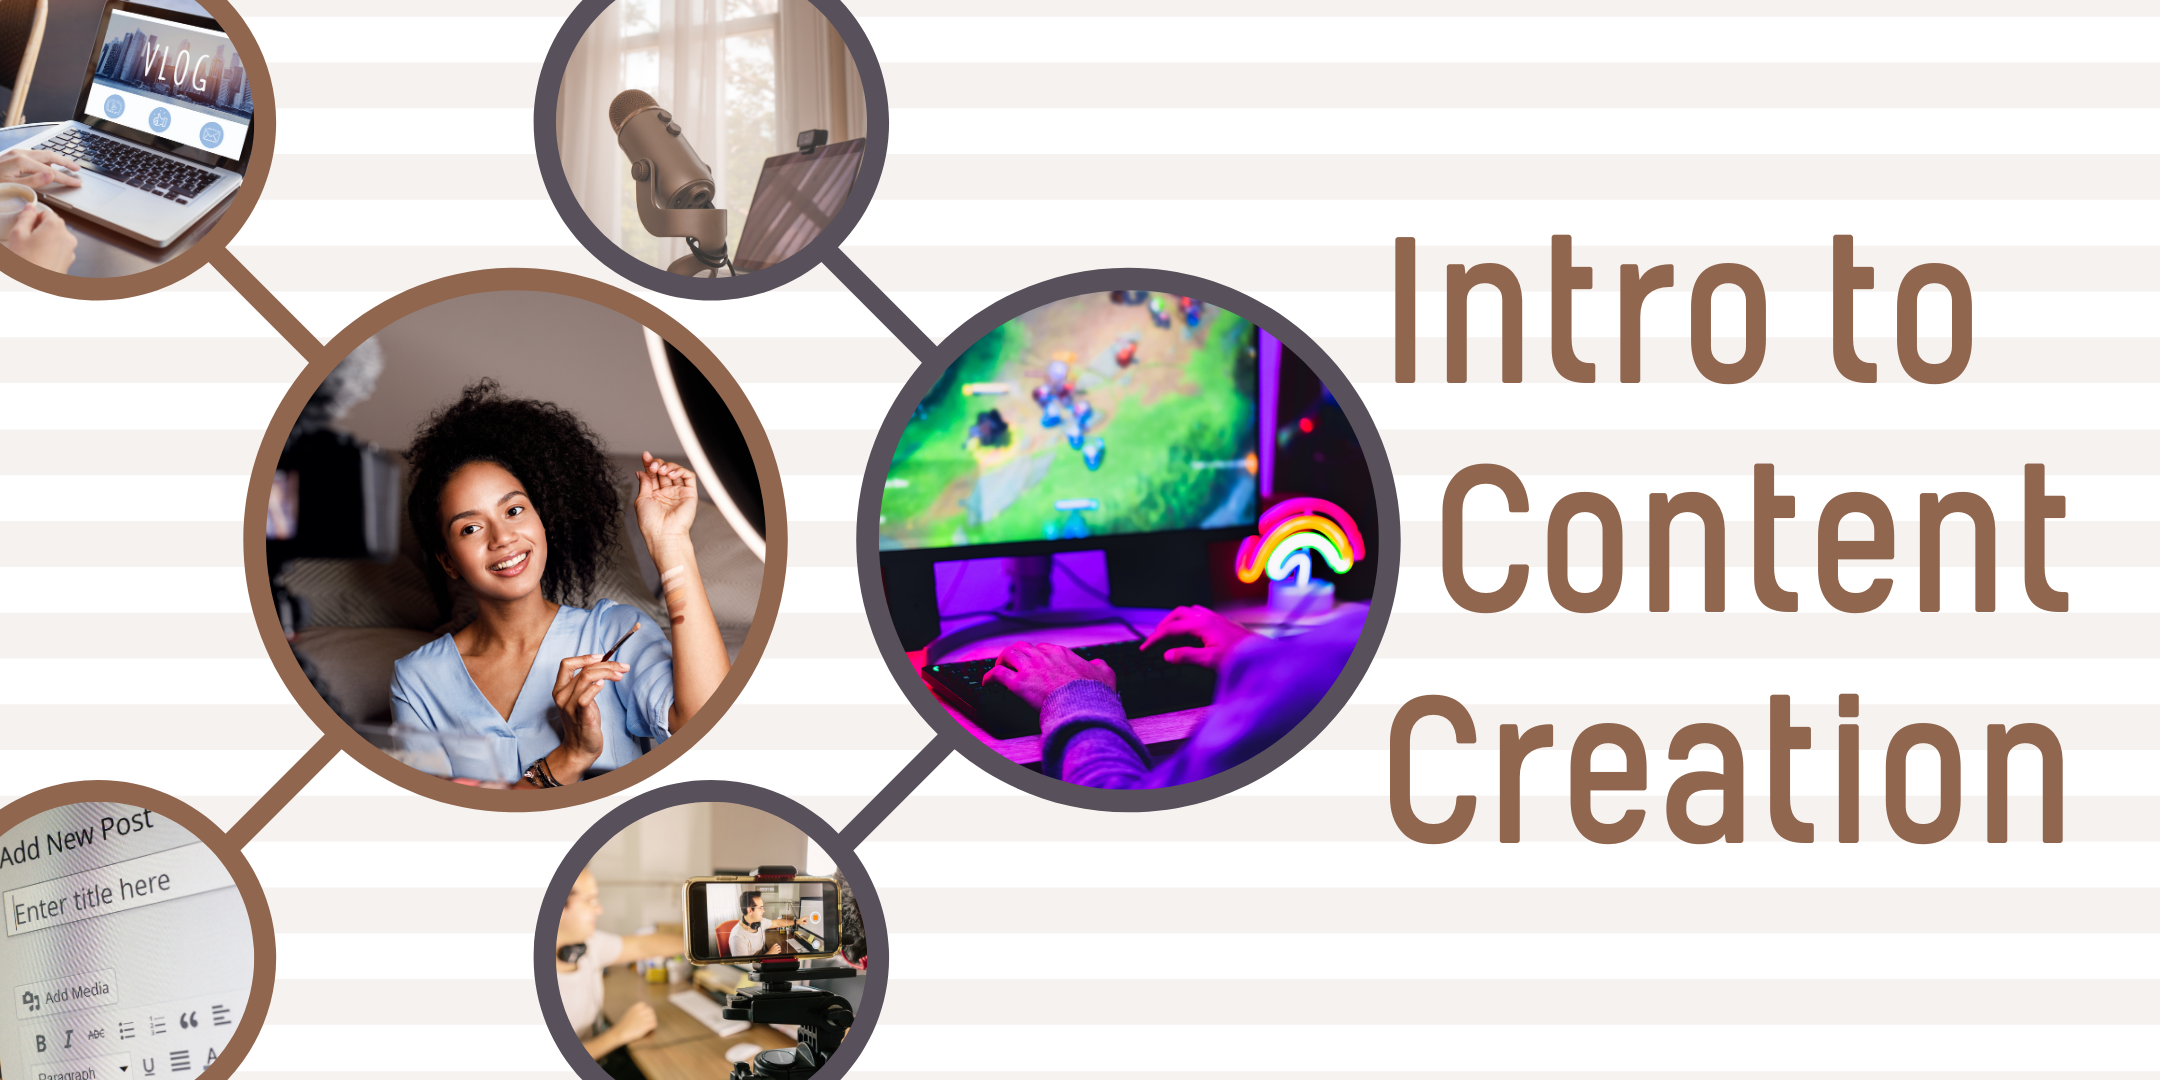 Intro to Content Creation image